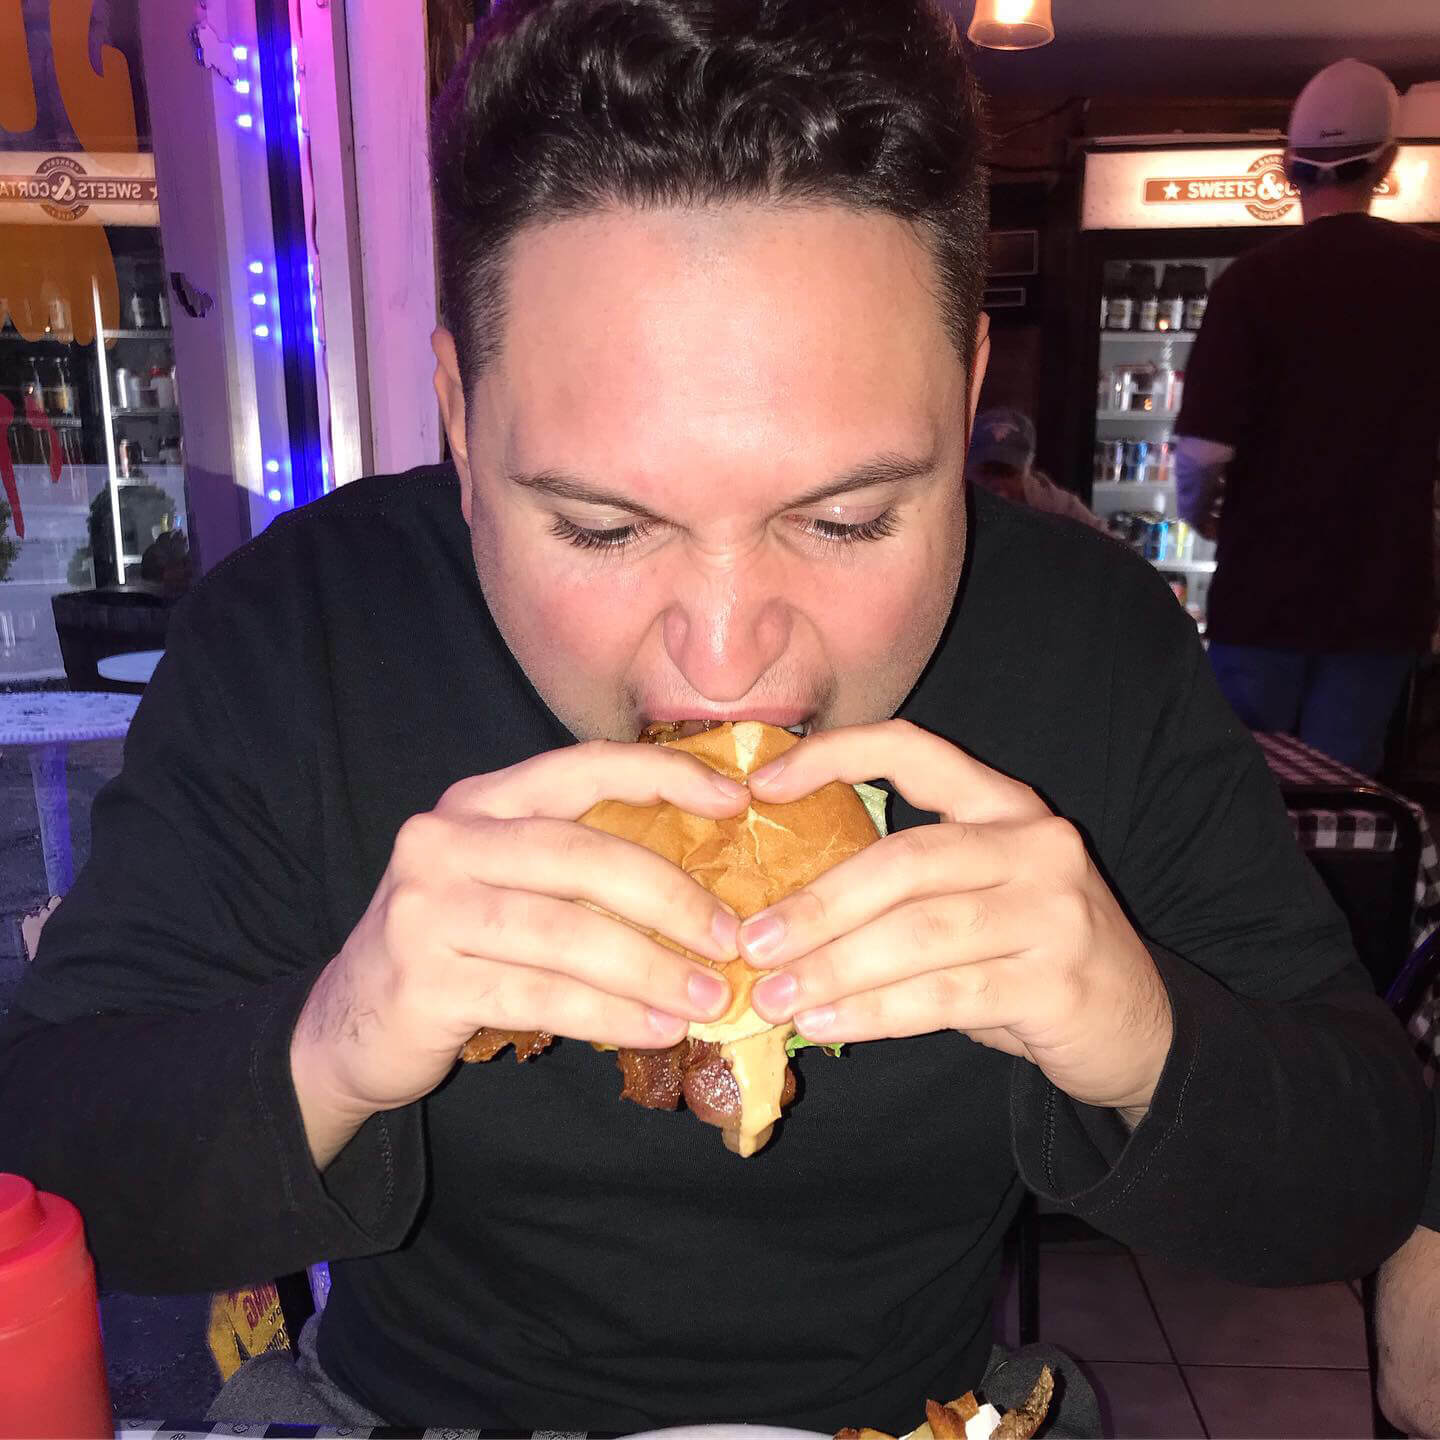 Marc DiPasquale eating a burger